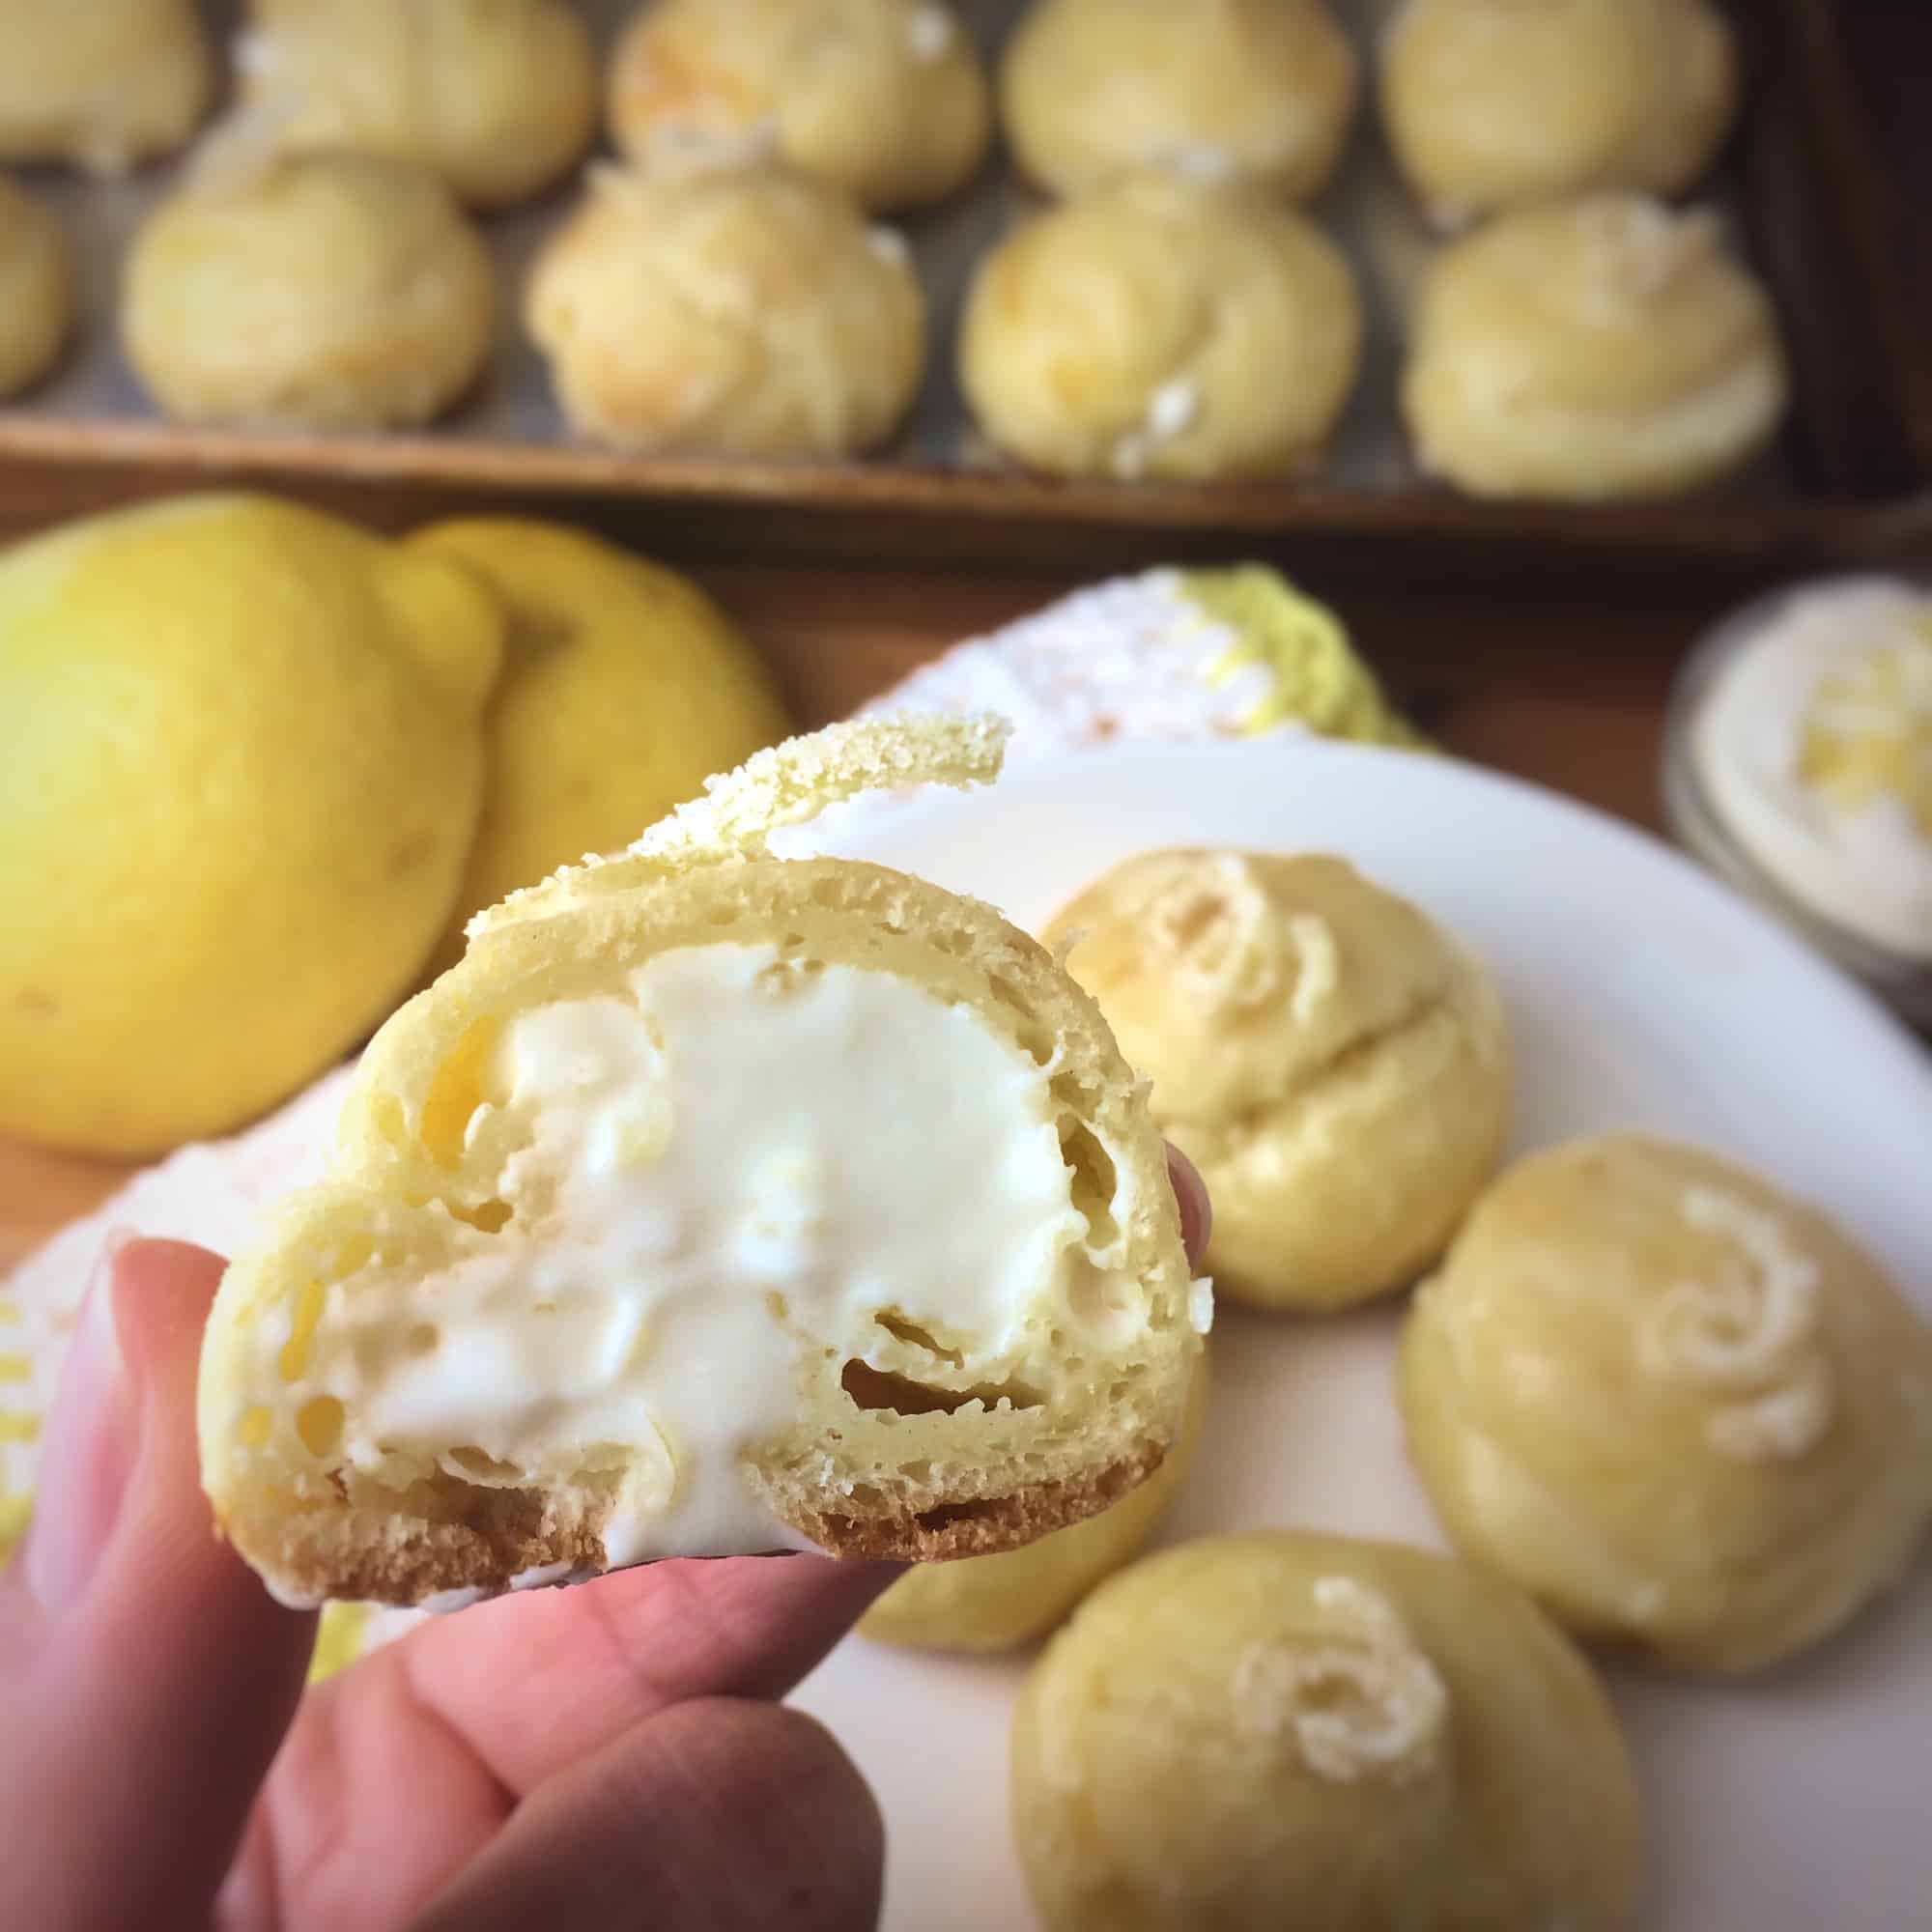 inside of choux bun with lemon curd and whipped cream